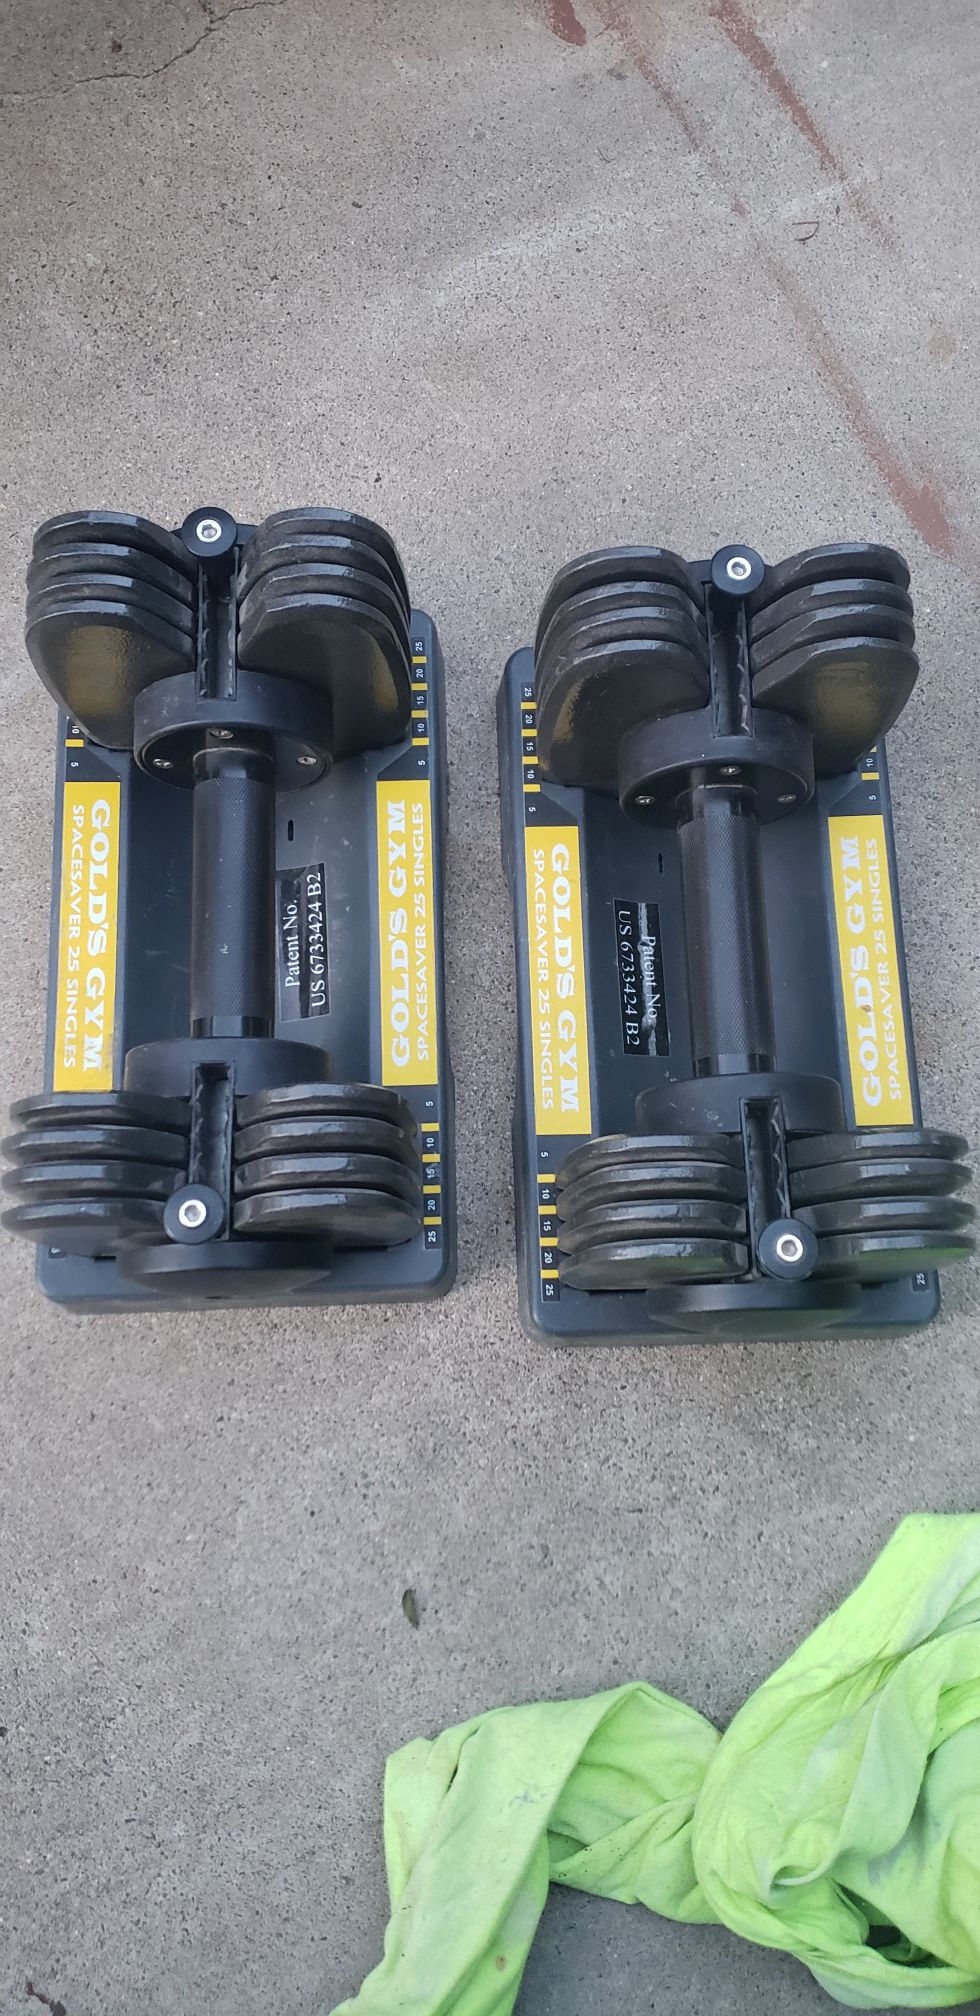 Dumbbells weights adjustable to 25lbs